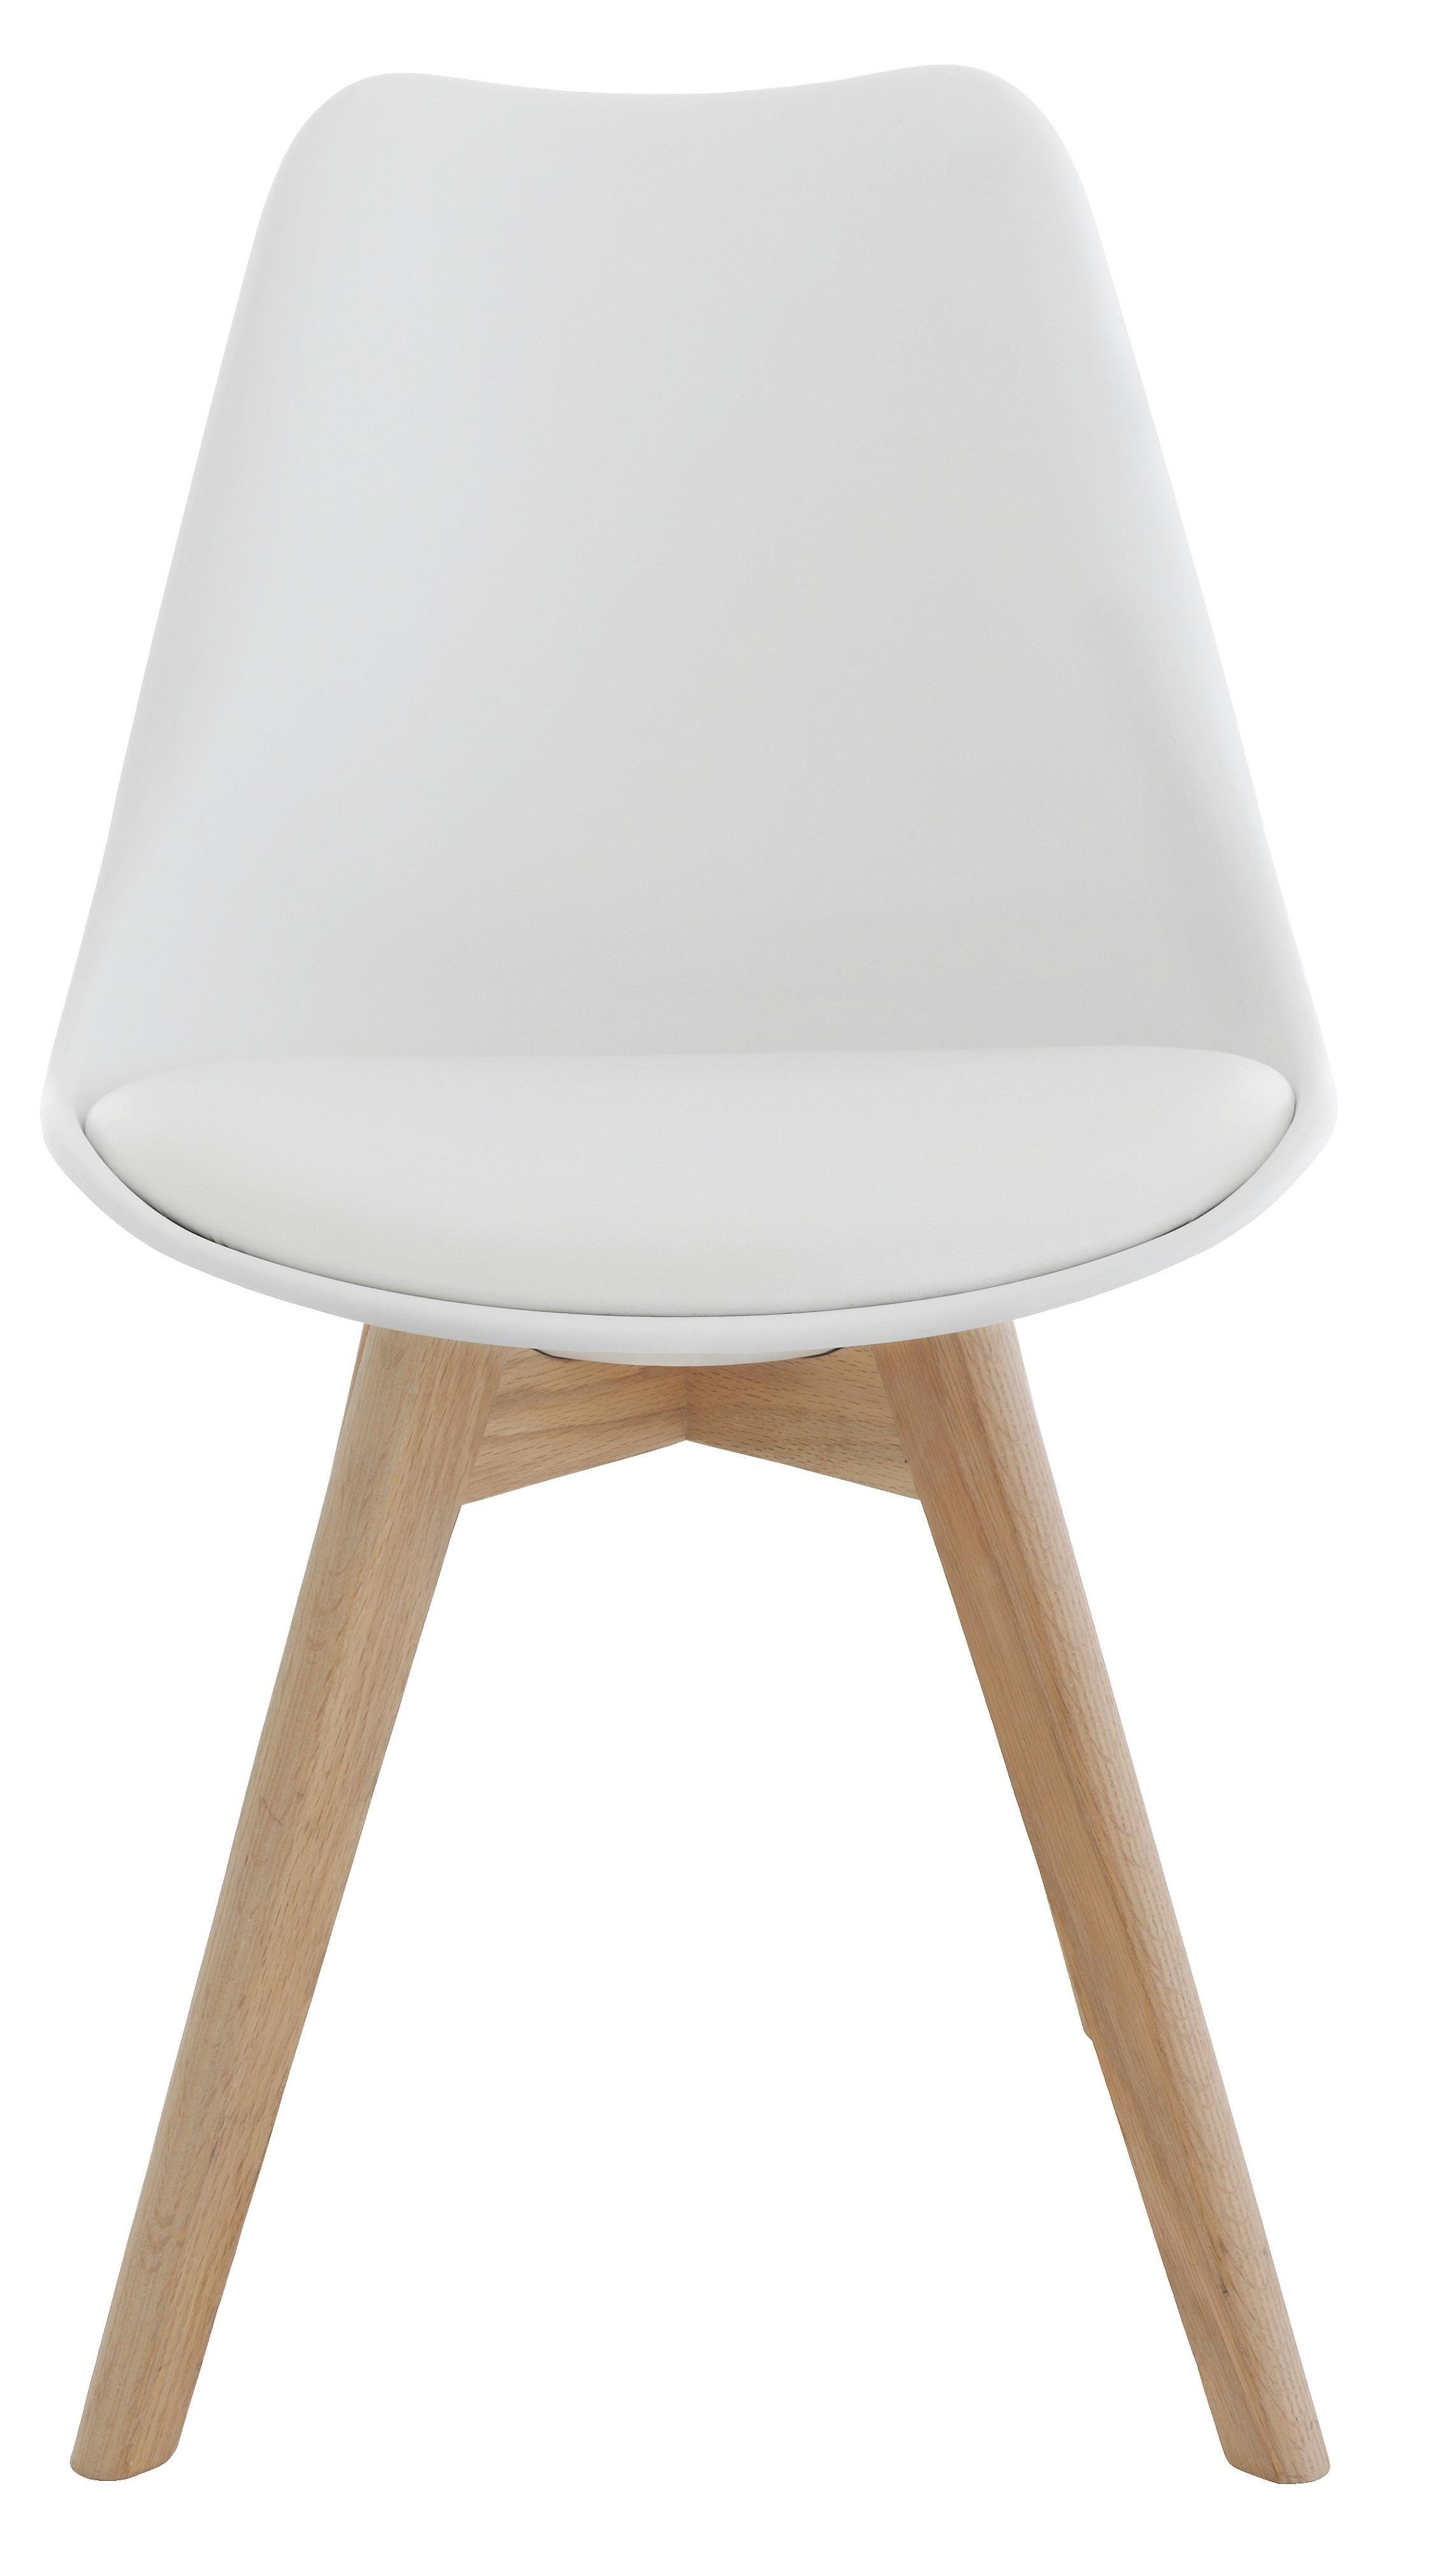 Buy Habitat Jerry Pair of Dining Chairs - White at Argos.co.uk - Your